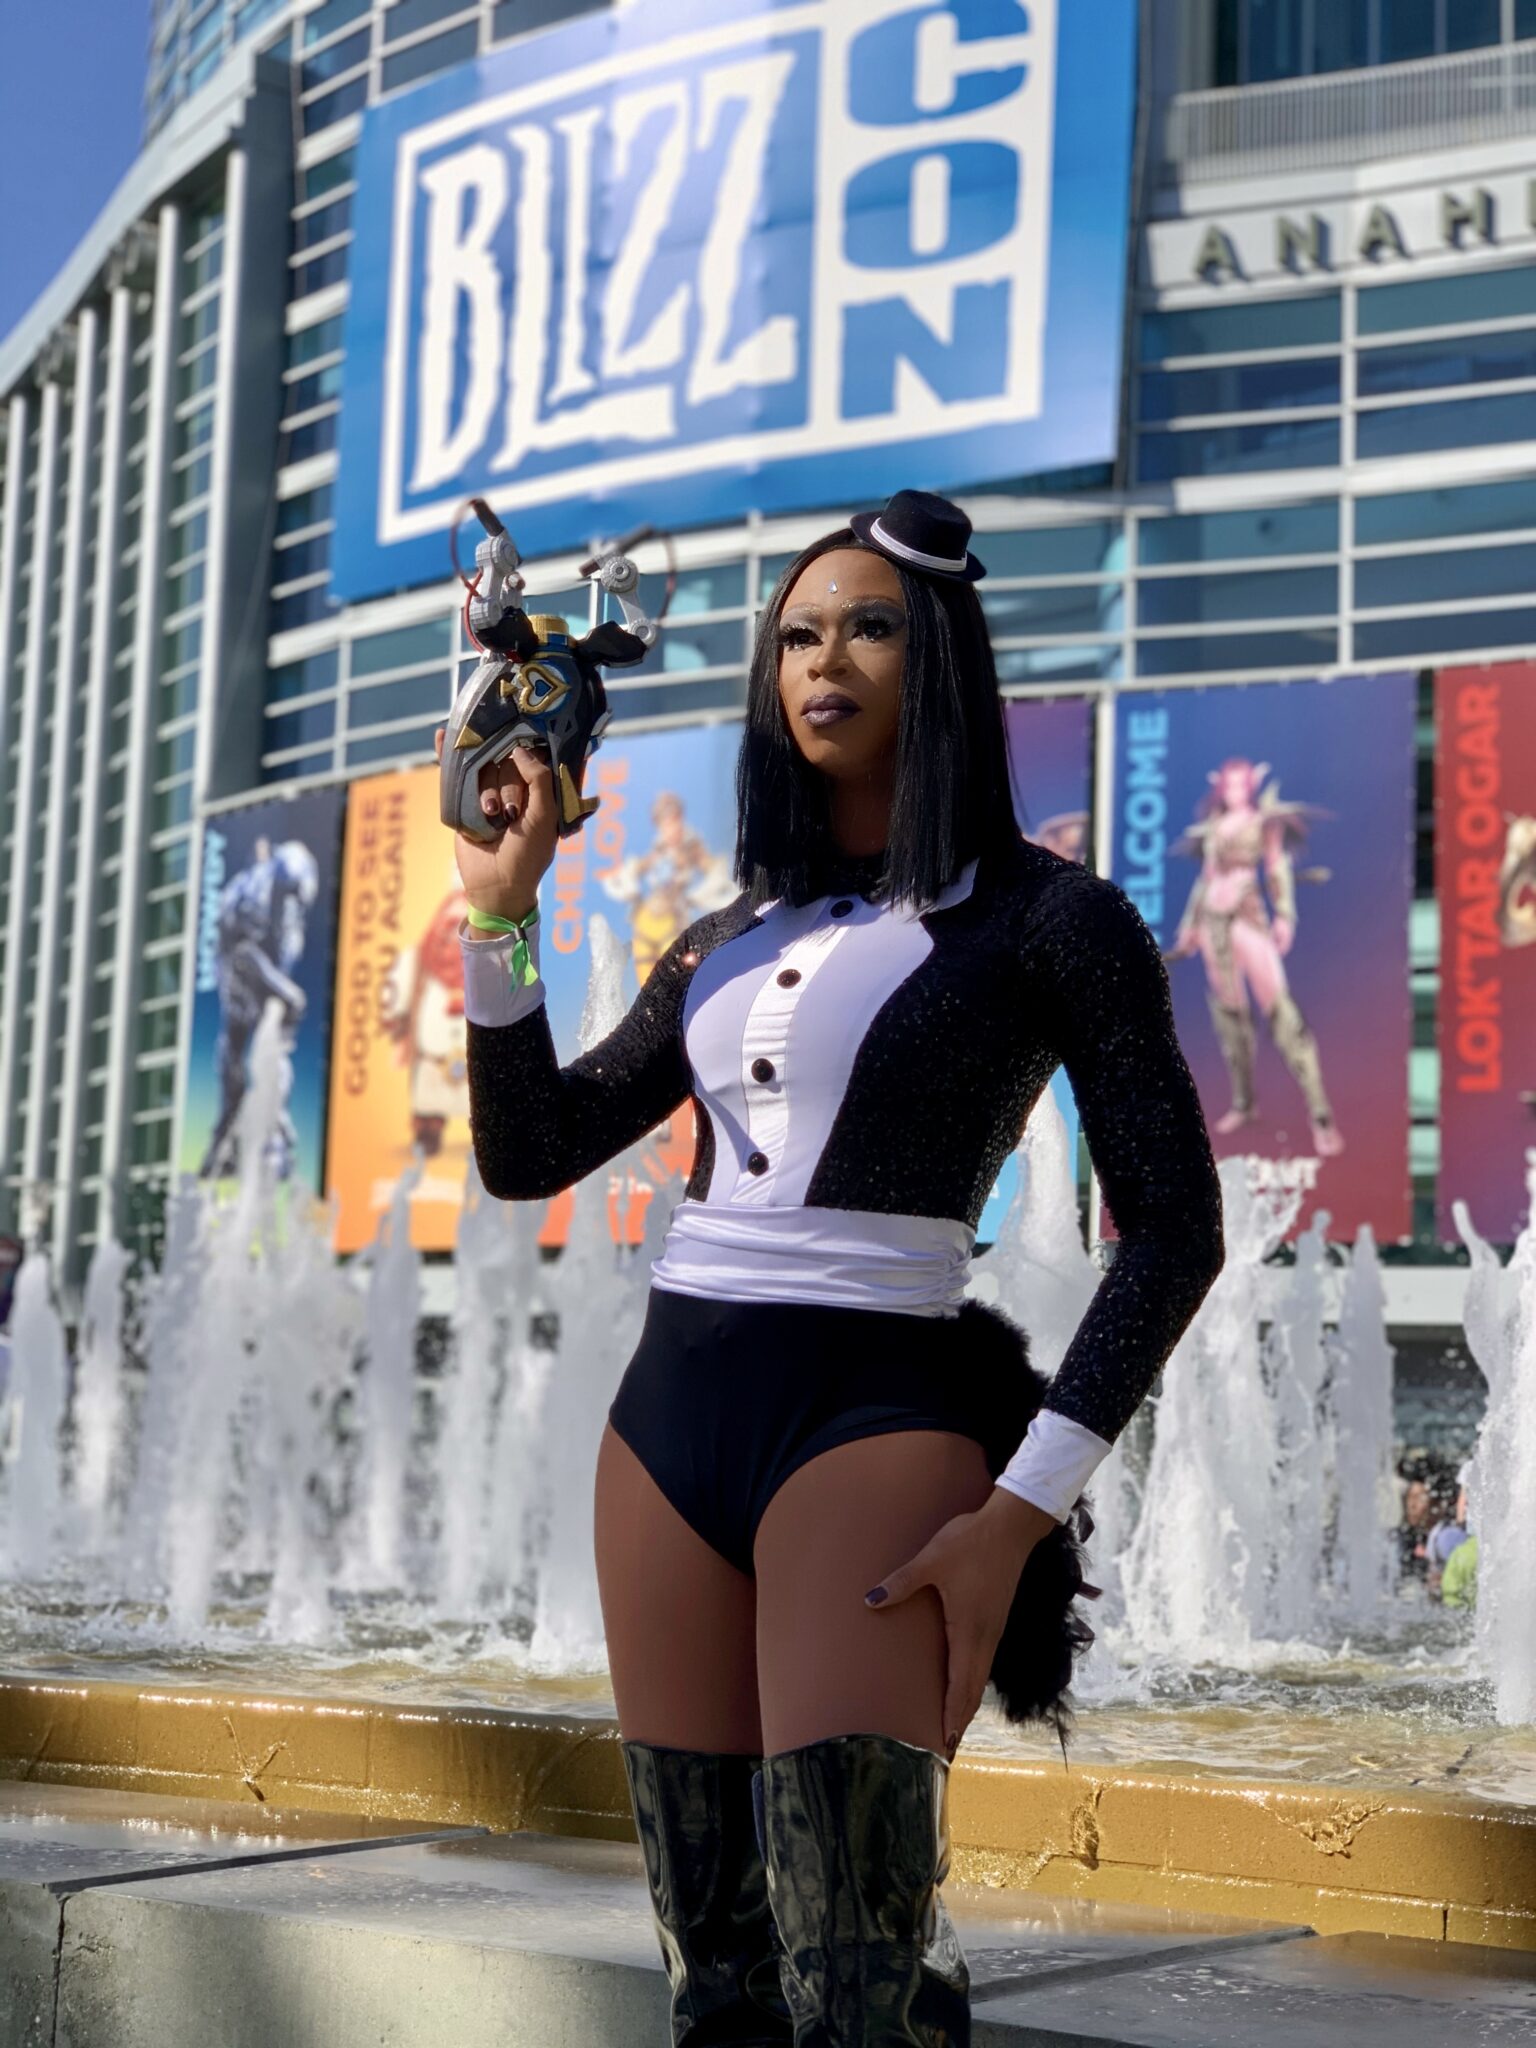 Rose Evergreen cosplaying as Symmetra from Overwatch for Blizzcon